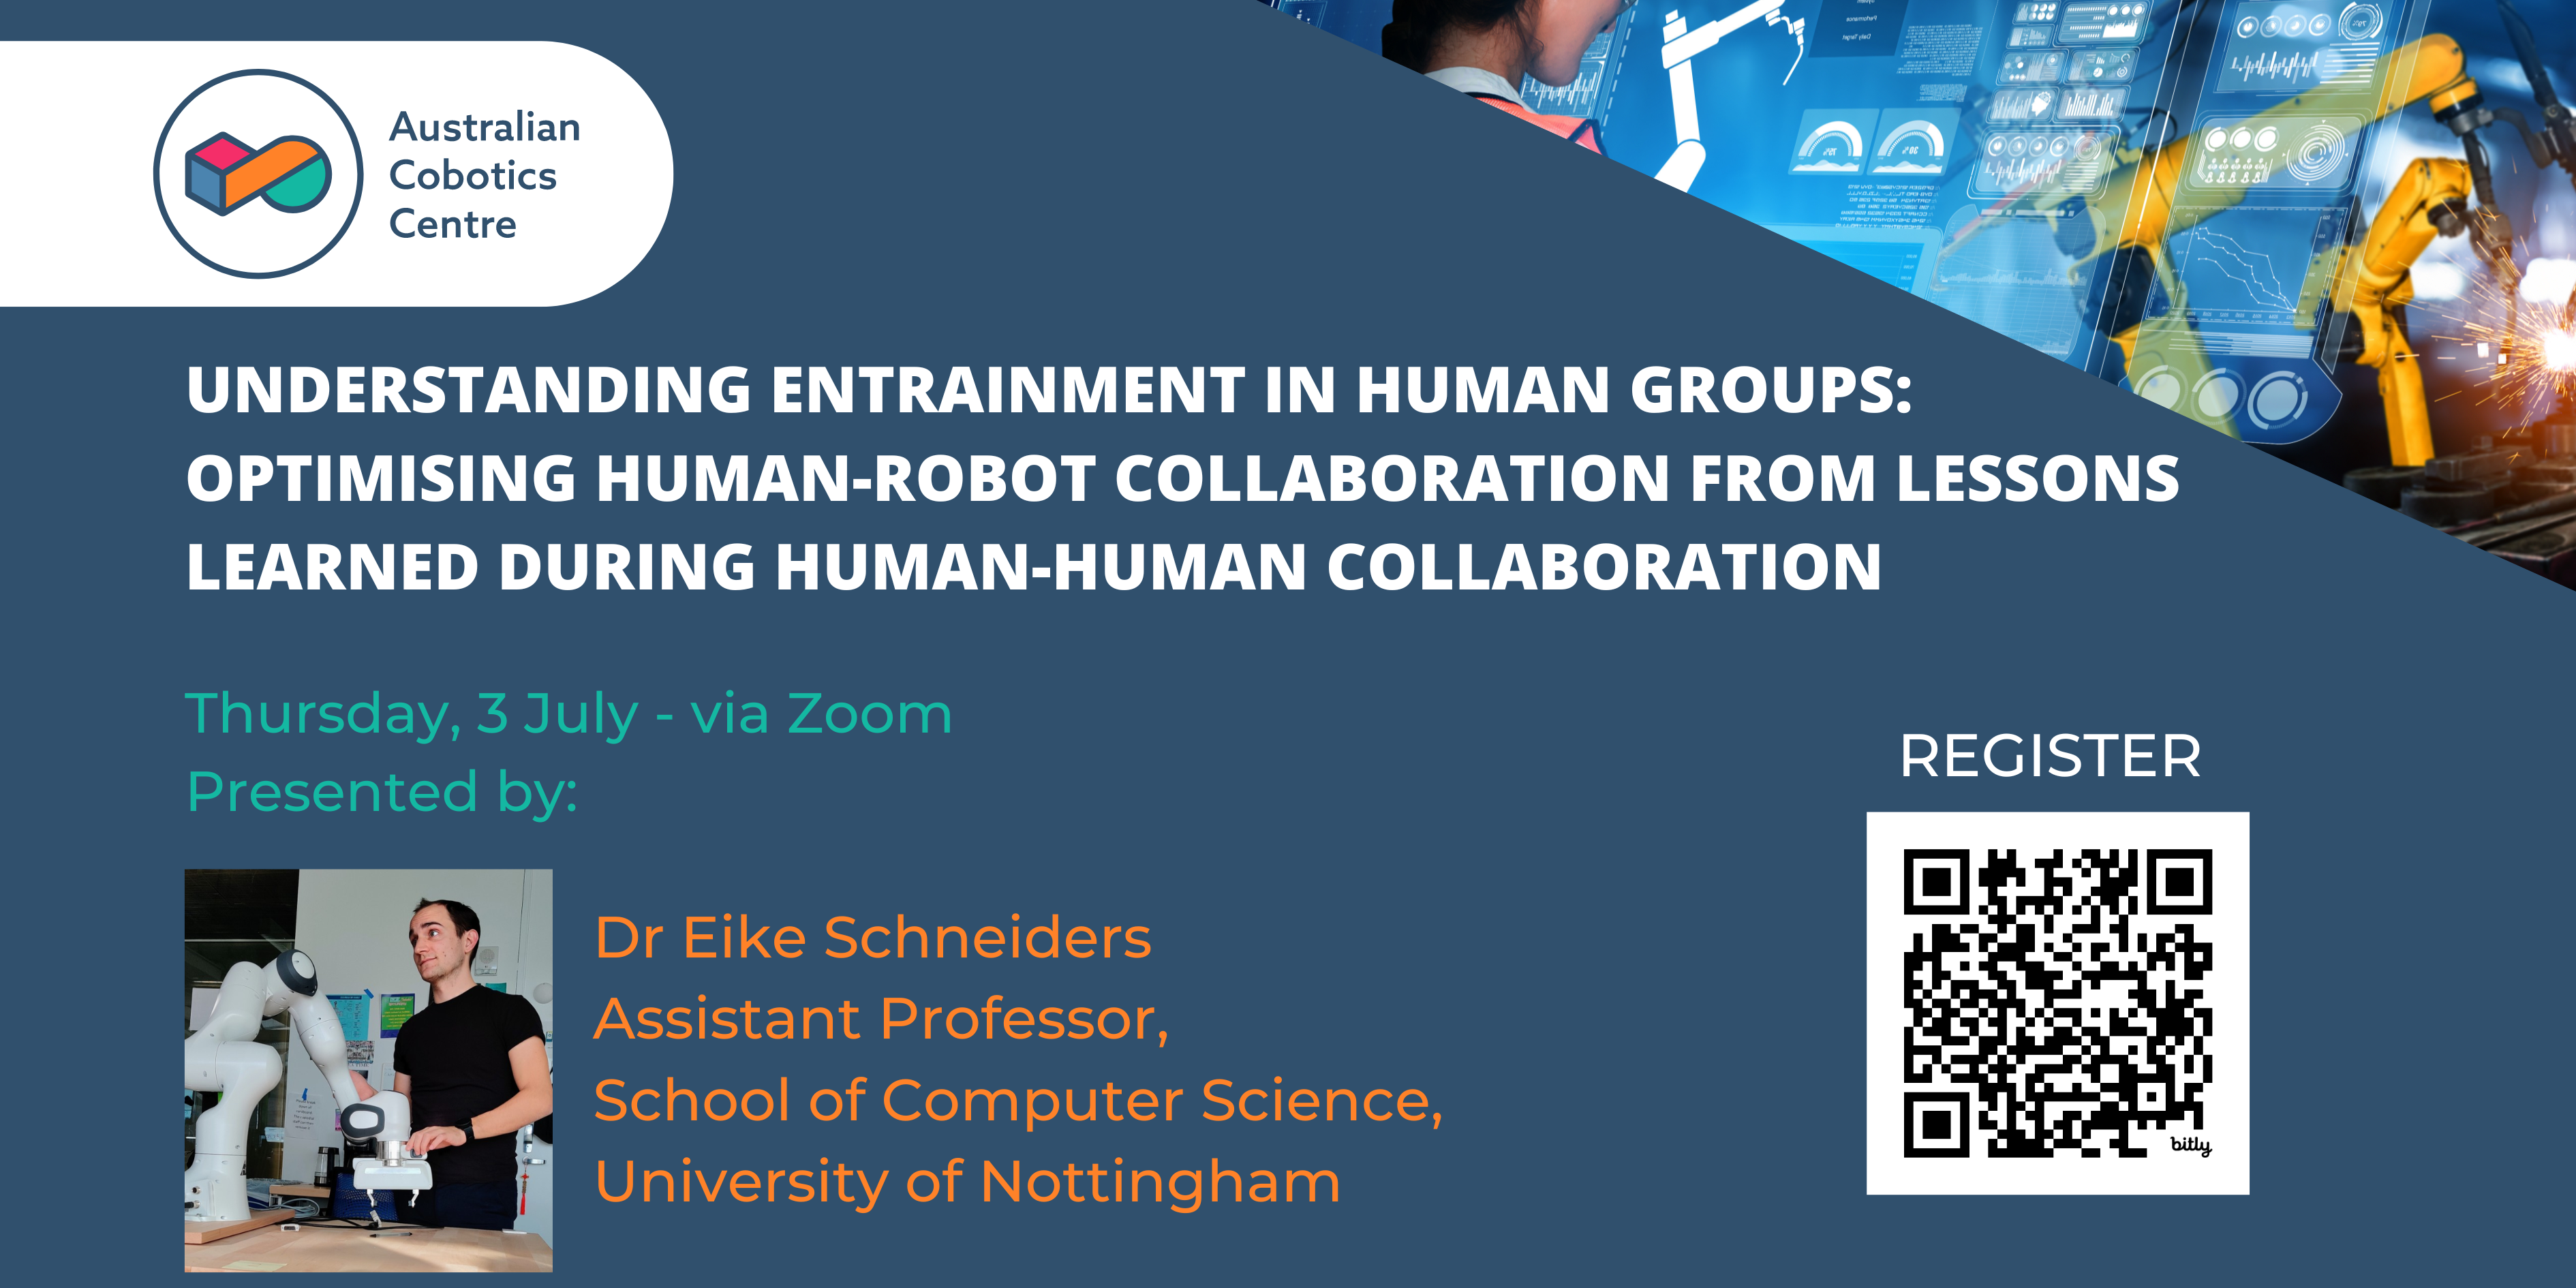 Seminar Series: Understanding Entrainment in Human Groups: Optimising HRC from Lessons Learned during Human-Human Collaboration